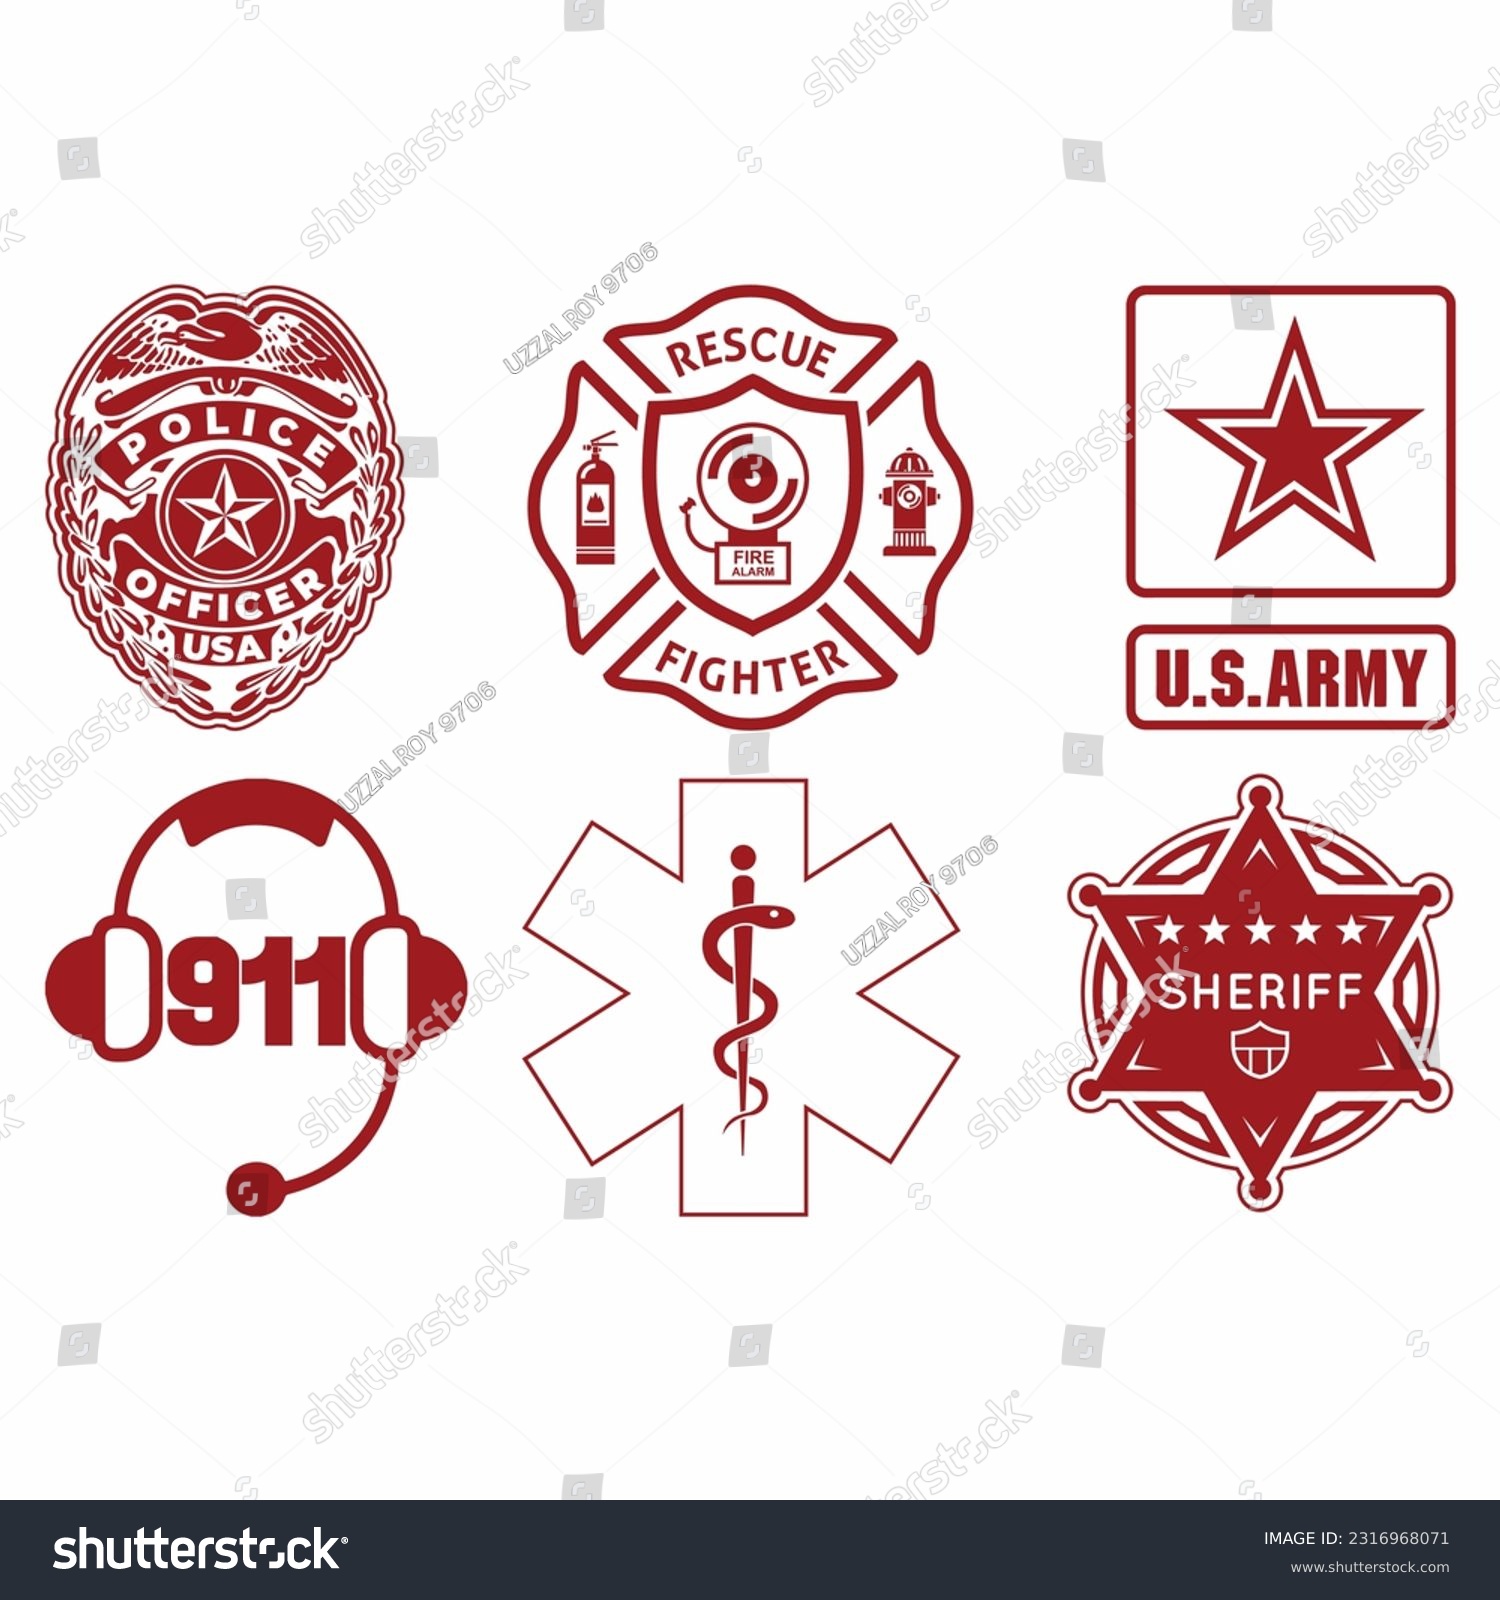 SVG of First Responders Hero Flag Nurse EMS Police Fire Military corrections dispatch Editable T shirt Design svg